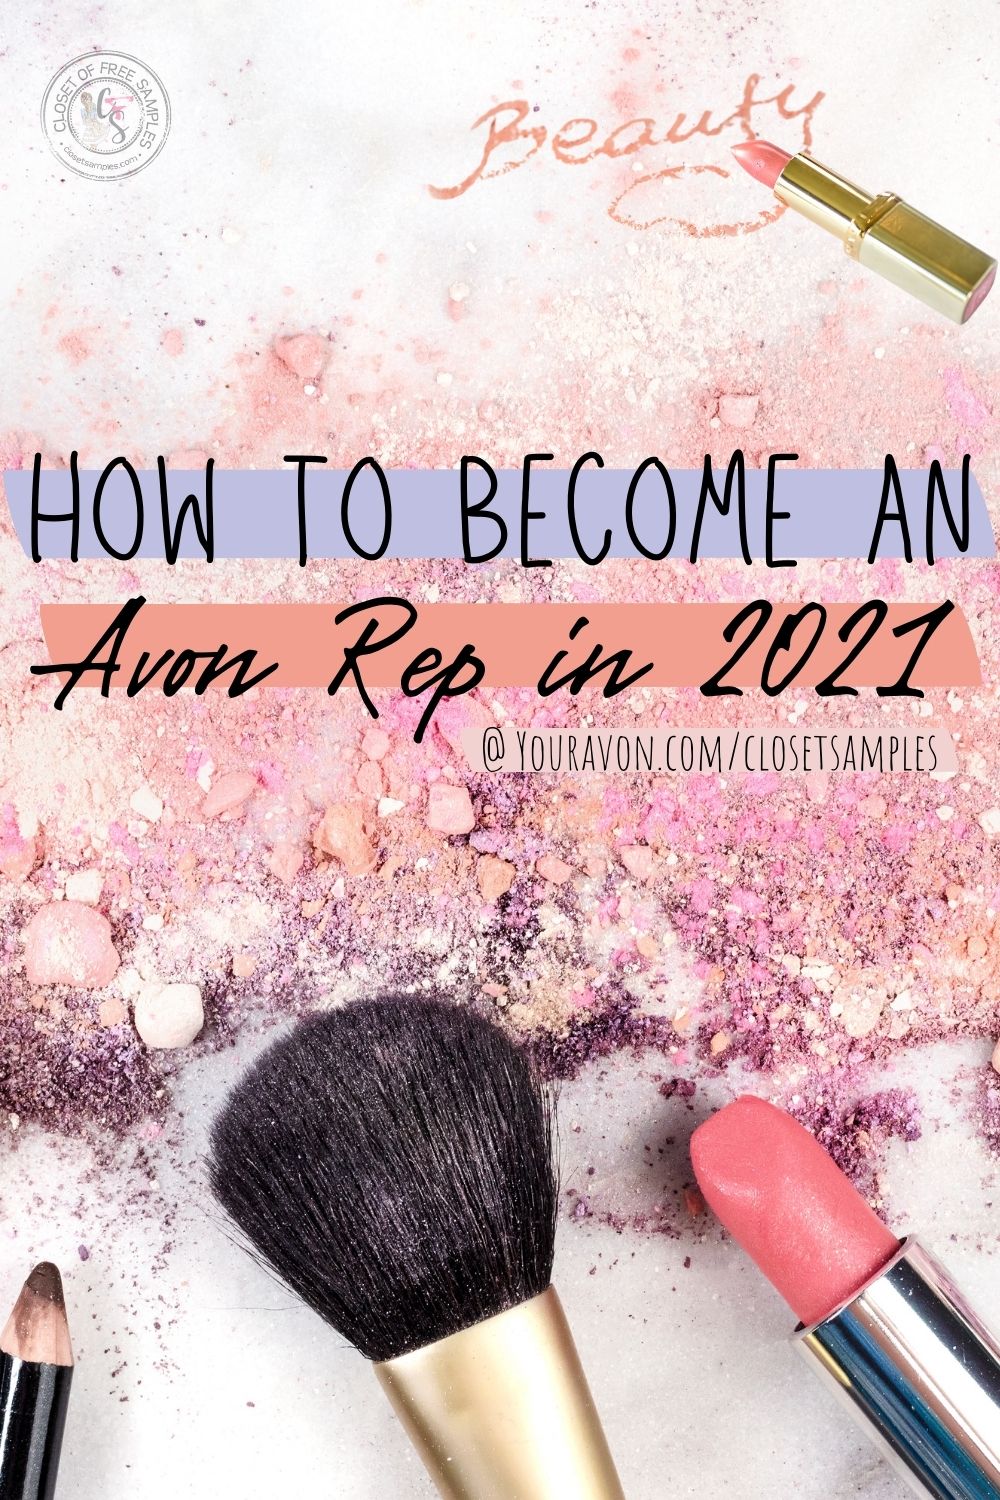 How to Become an Avon Rep in 2021 closetsamples Pinterest